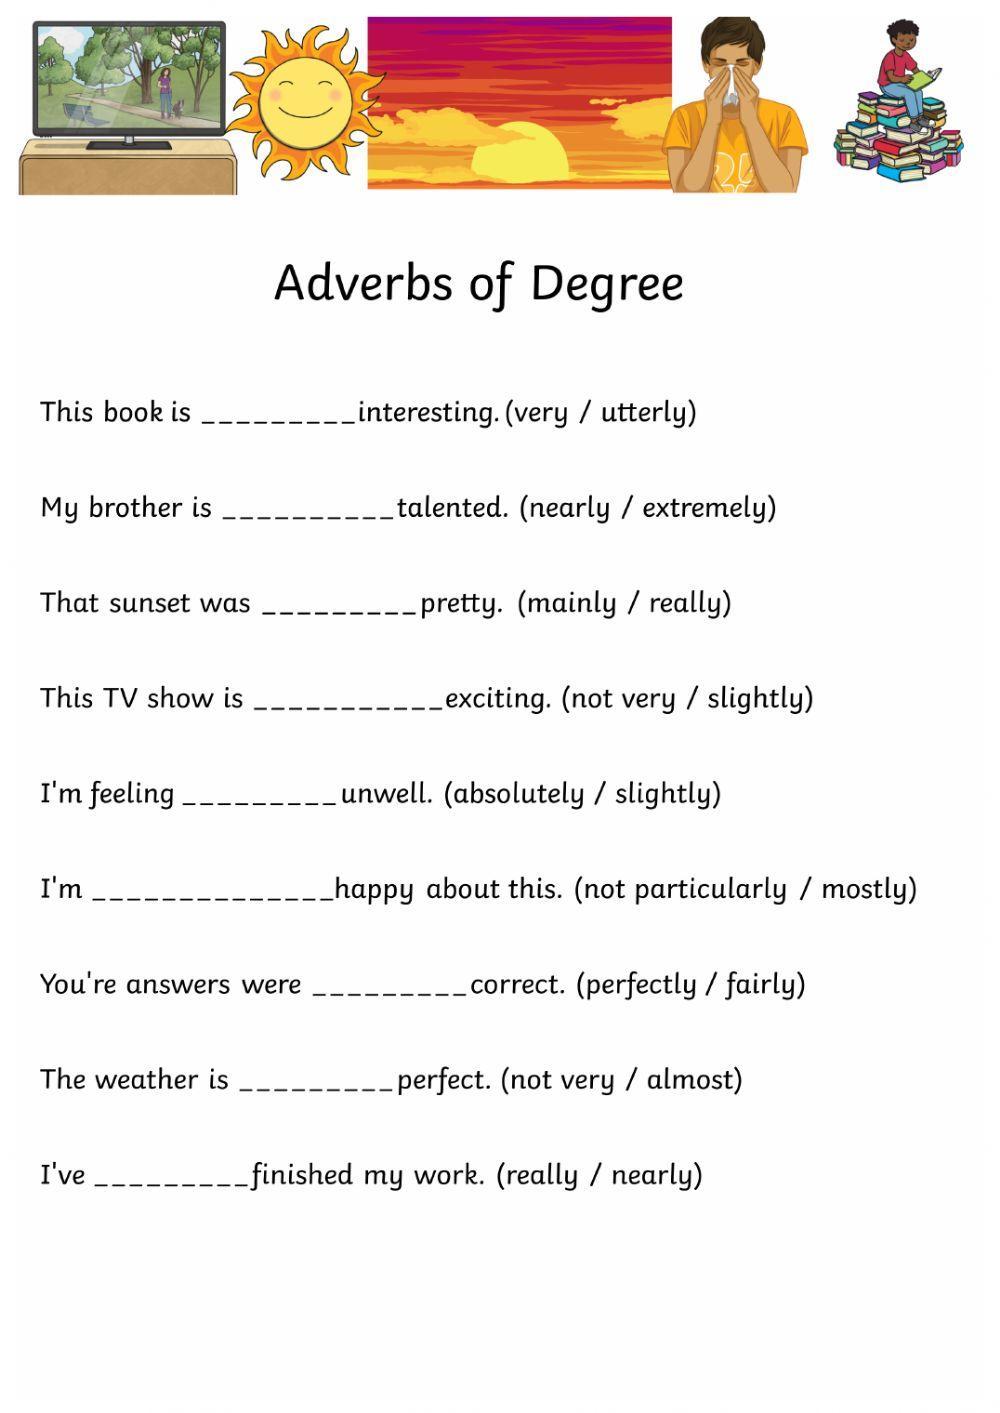 ADVERBS OF DEGREE